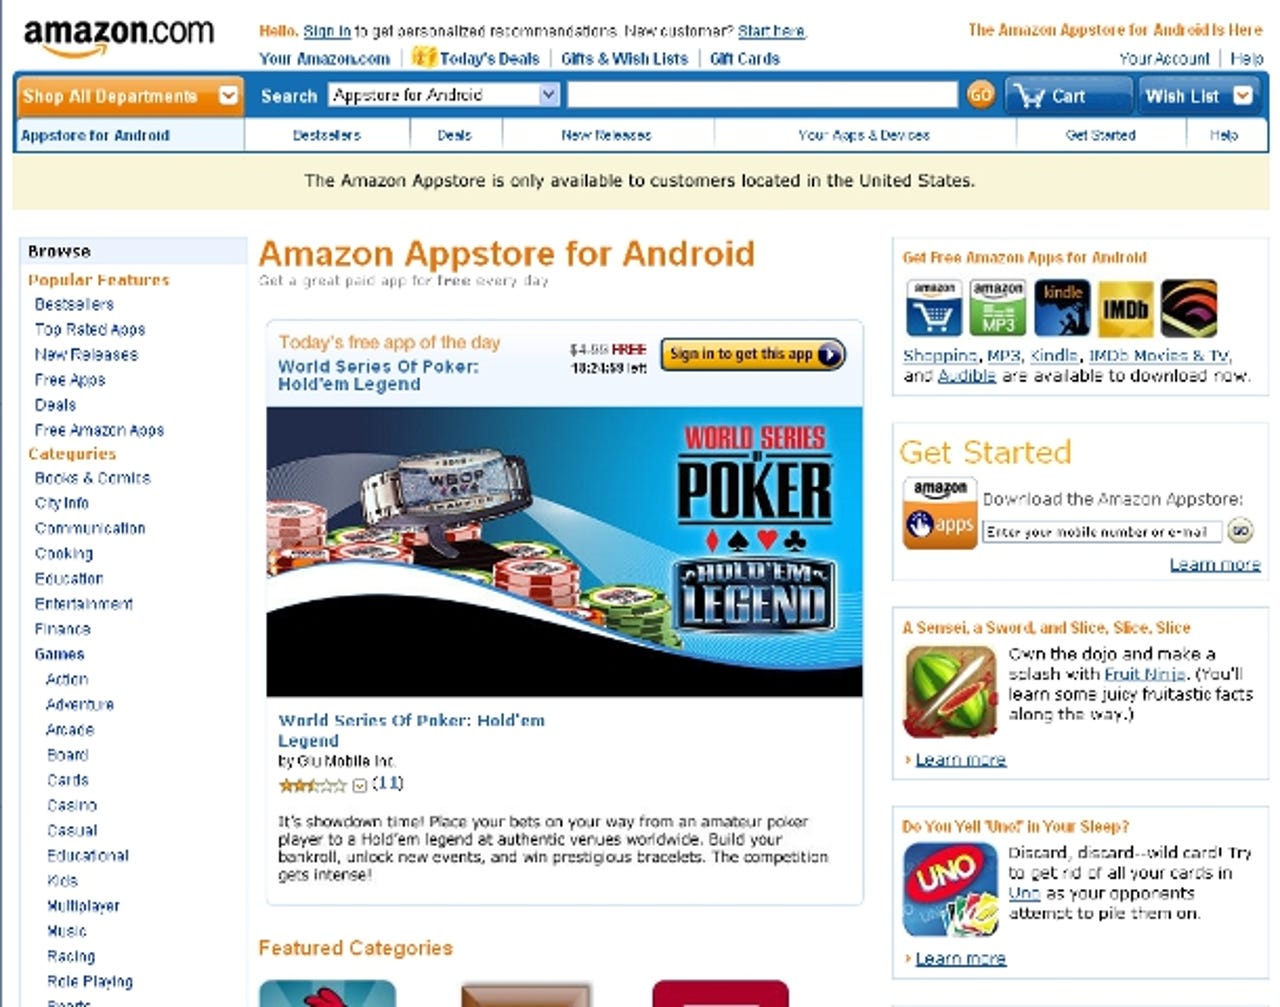 The Amazon Appstore lets customers try before they buy